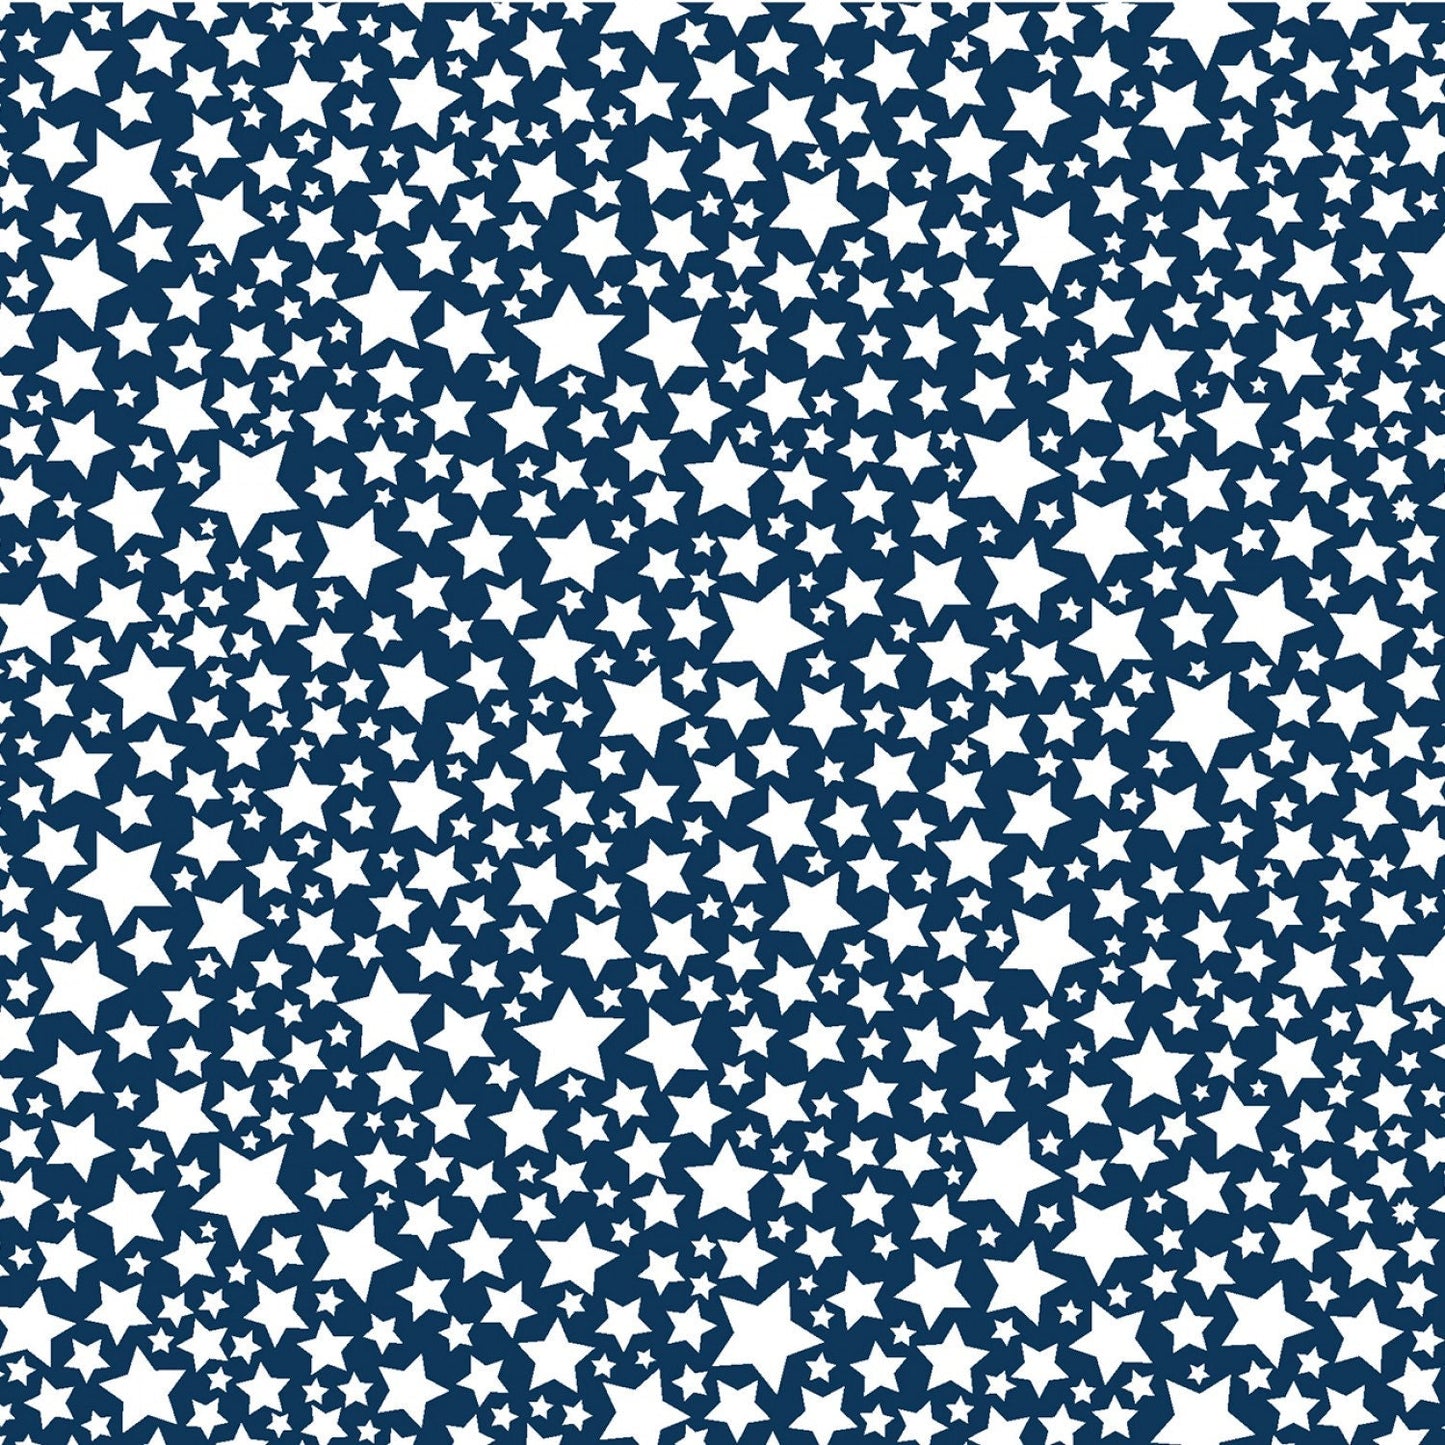 Super Starlettes Navy Glow in the Dark Fabric CG5720-NAVY Cotton Woven Fabric